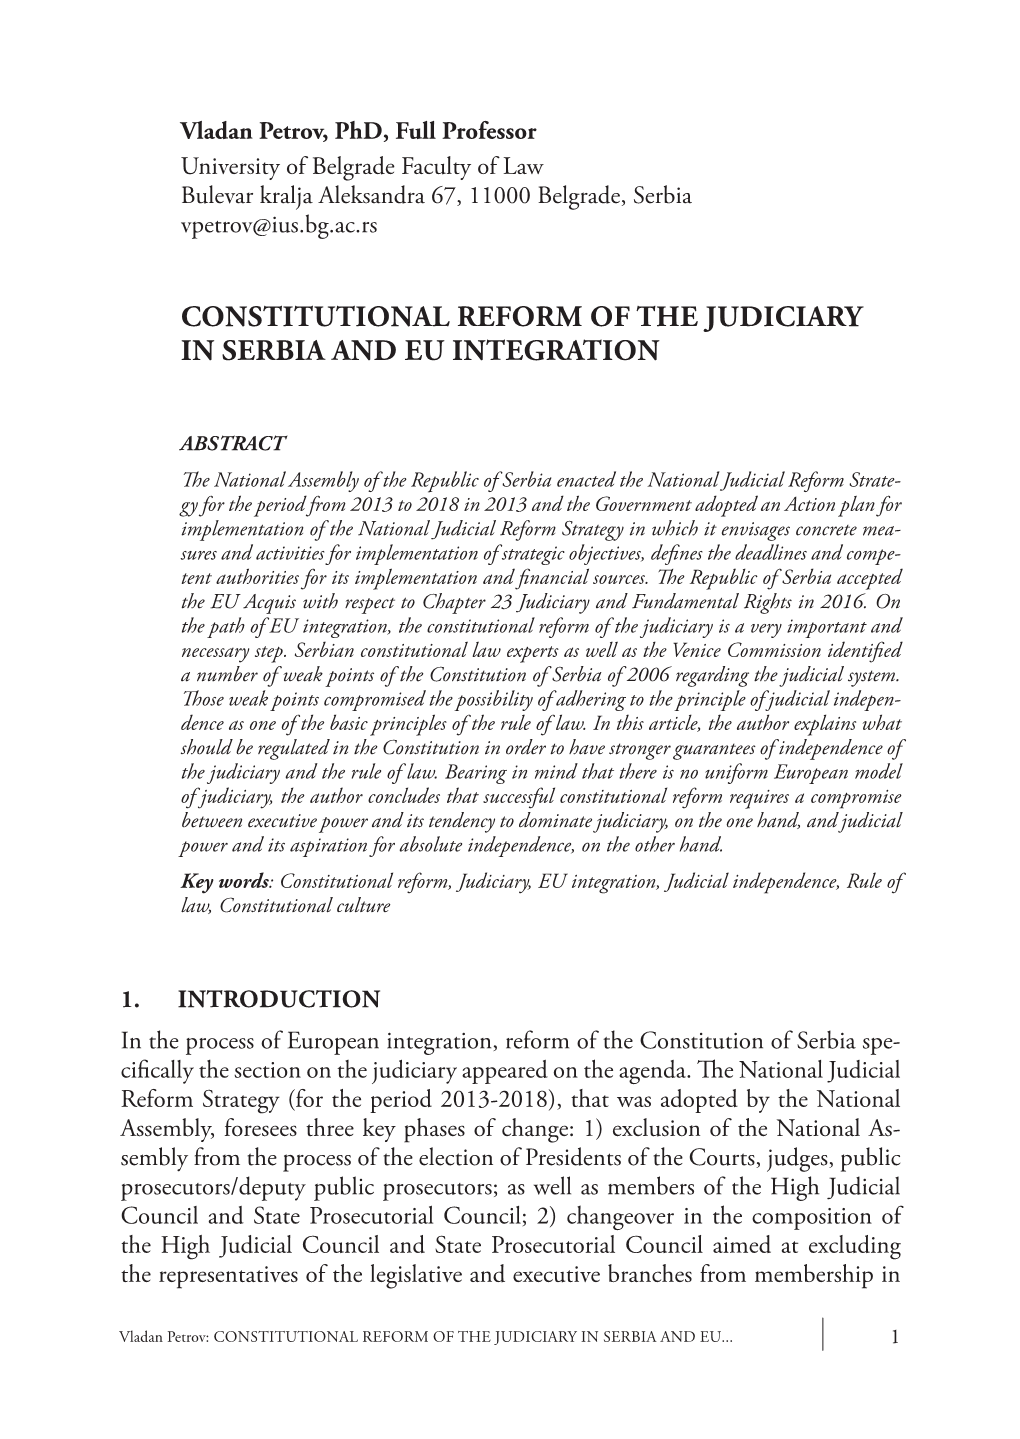 Constitutional Reform of the Judiciary in Serbia and Eu Integration